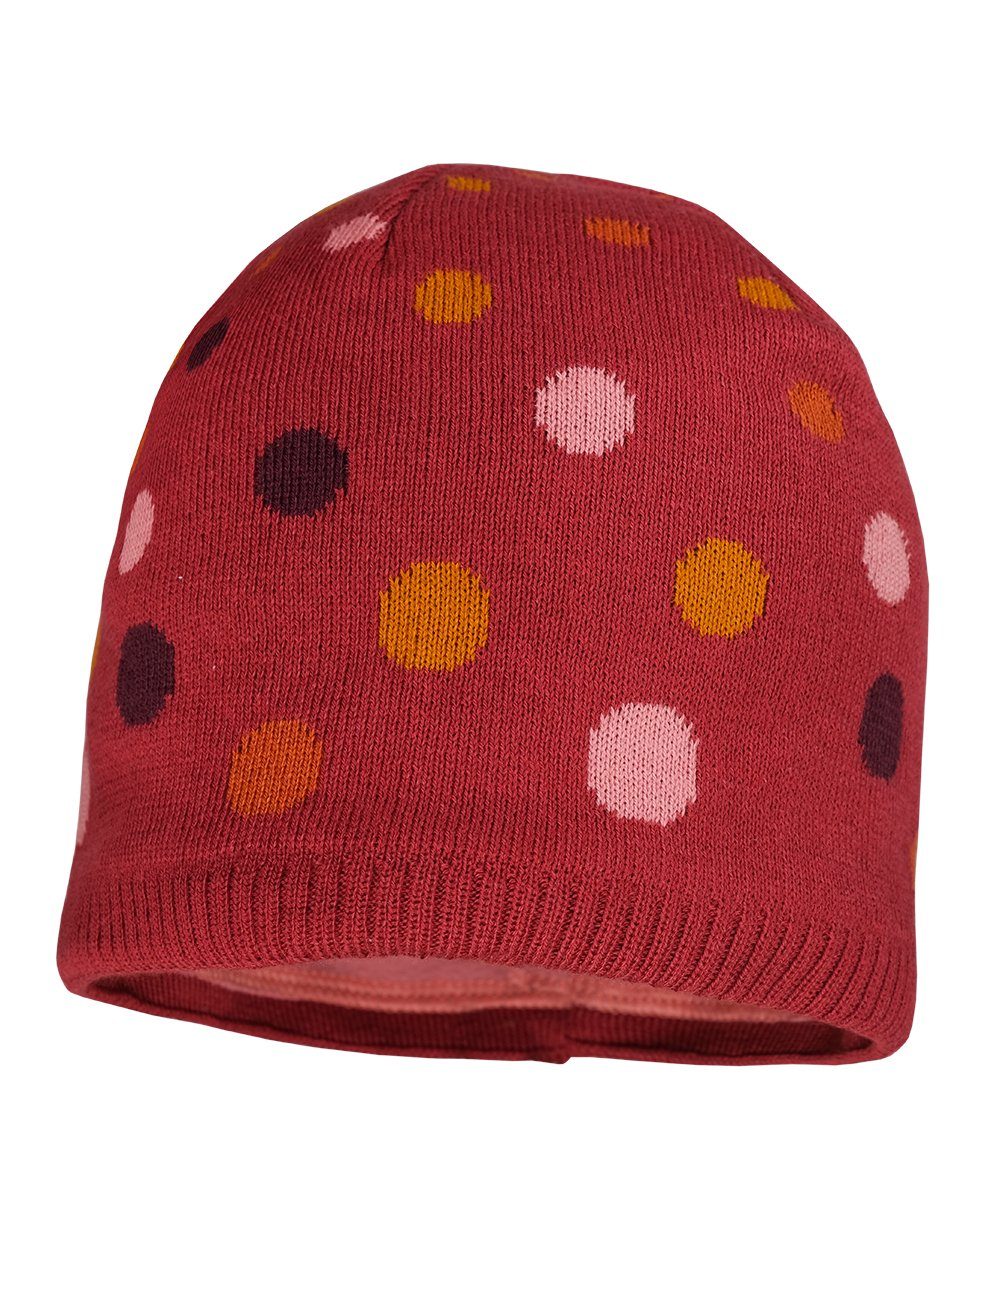 MAXIMO Strickmütze MINI GIRL-Beanie Jacquard Punkte, Jerseyfutter Made in Germany rosewood